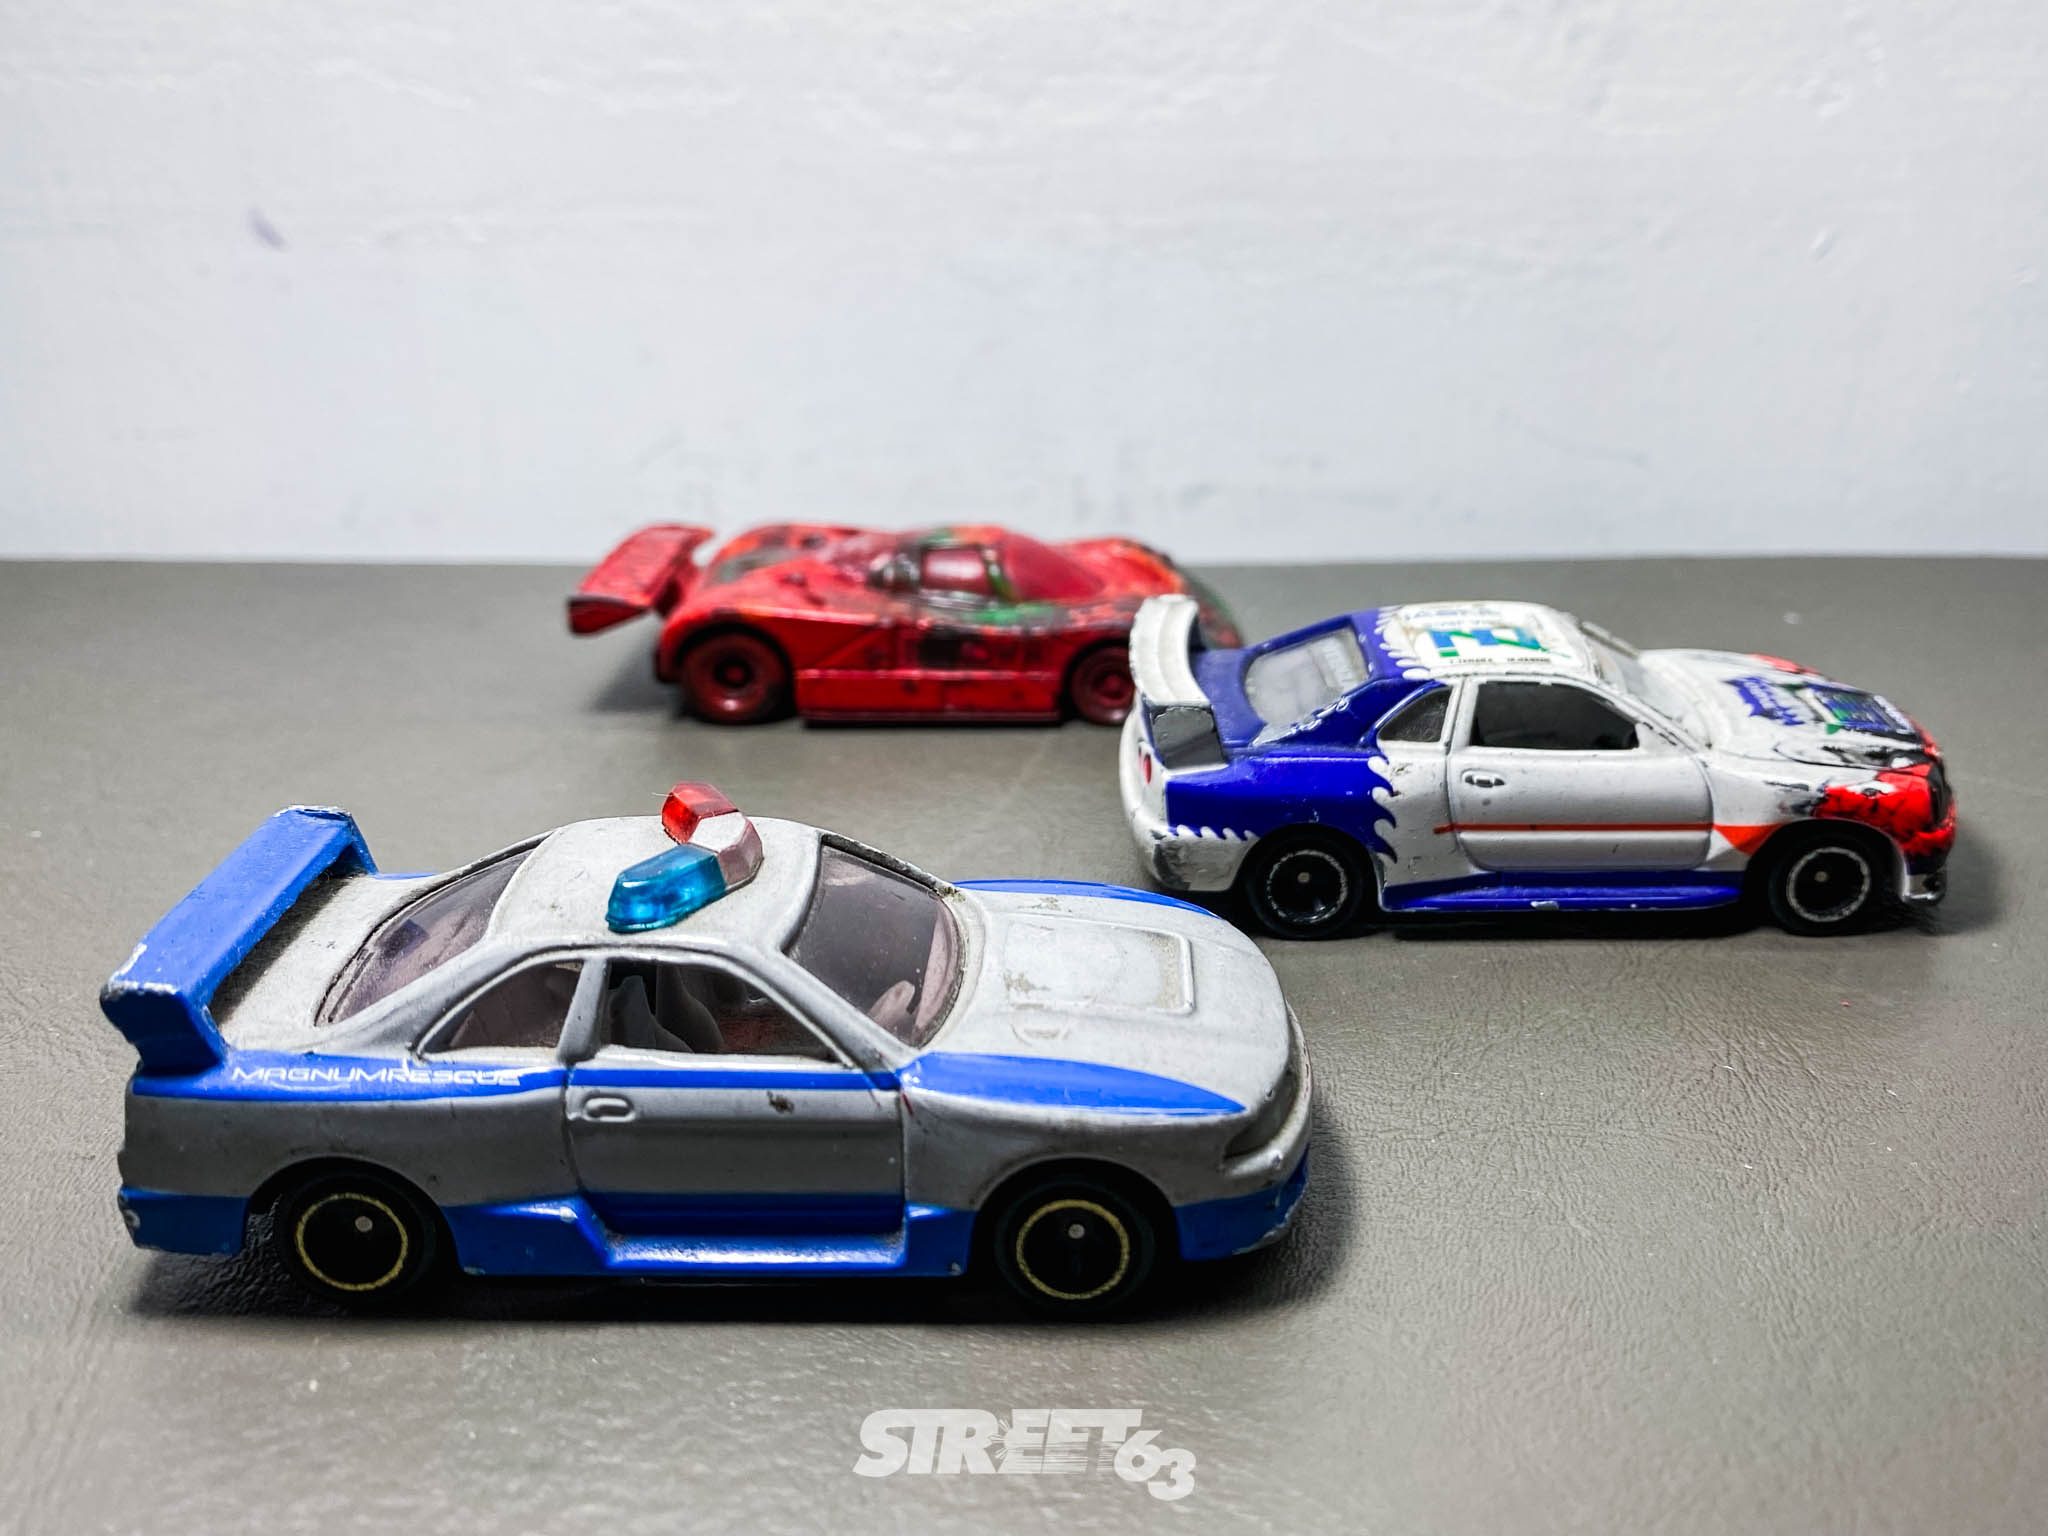 Mini63: The Street63 Diecast Collection 25